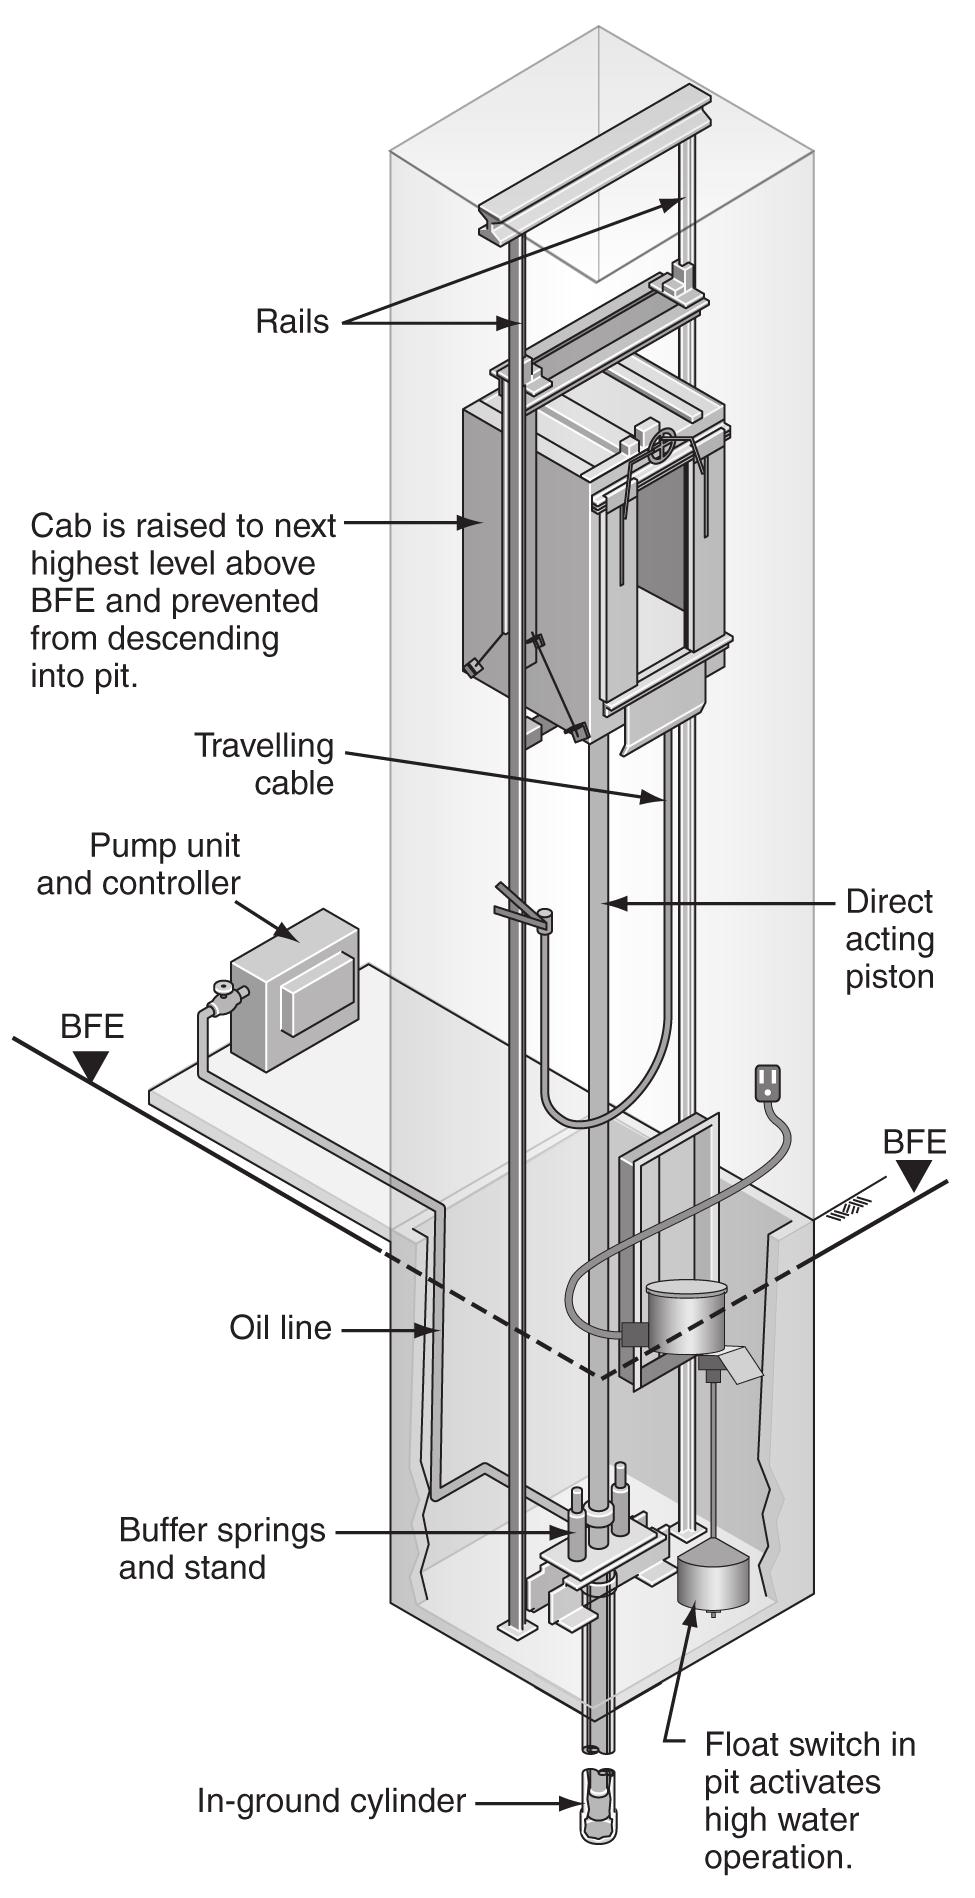 Installing a detection system with one or more float switches in the elevator shaft will prevent the elevator cab from descending into floodwaters (Figure 5), providing a much safer system while